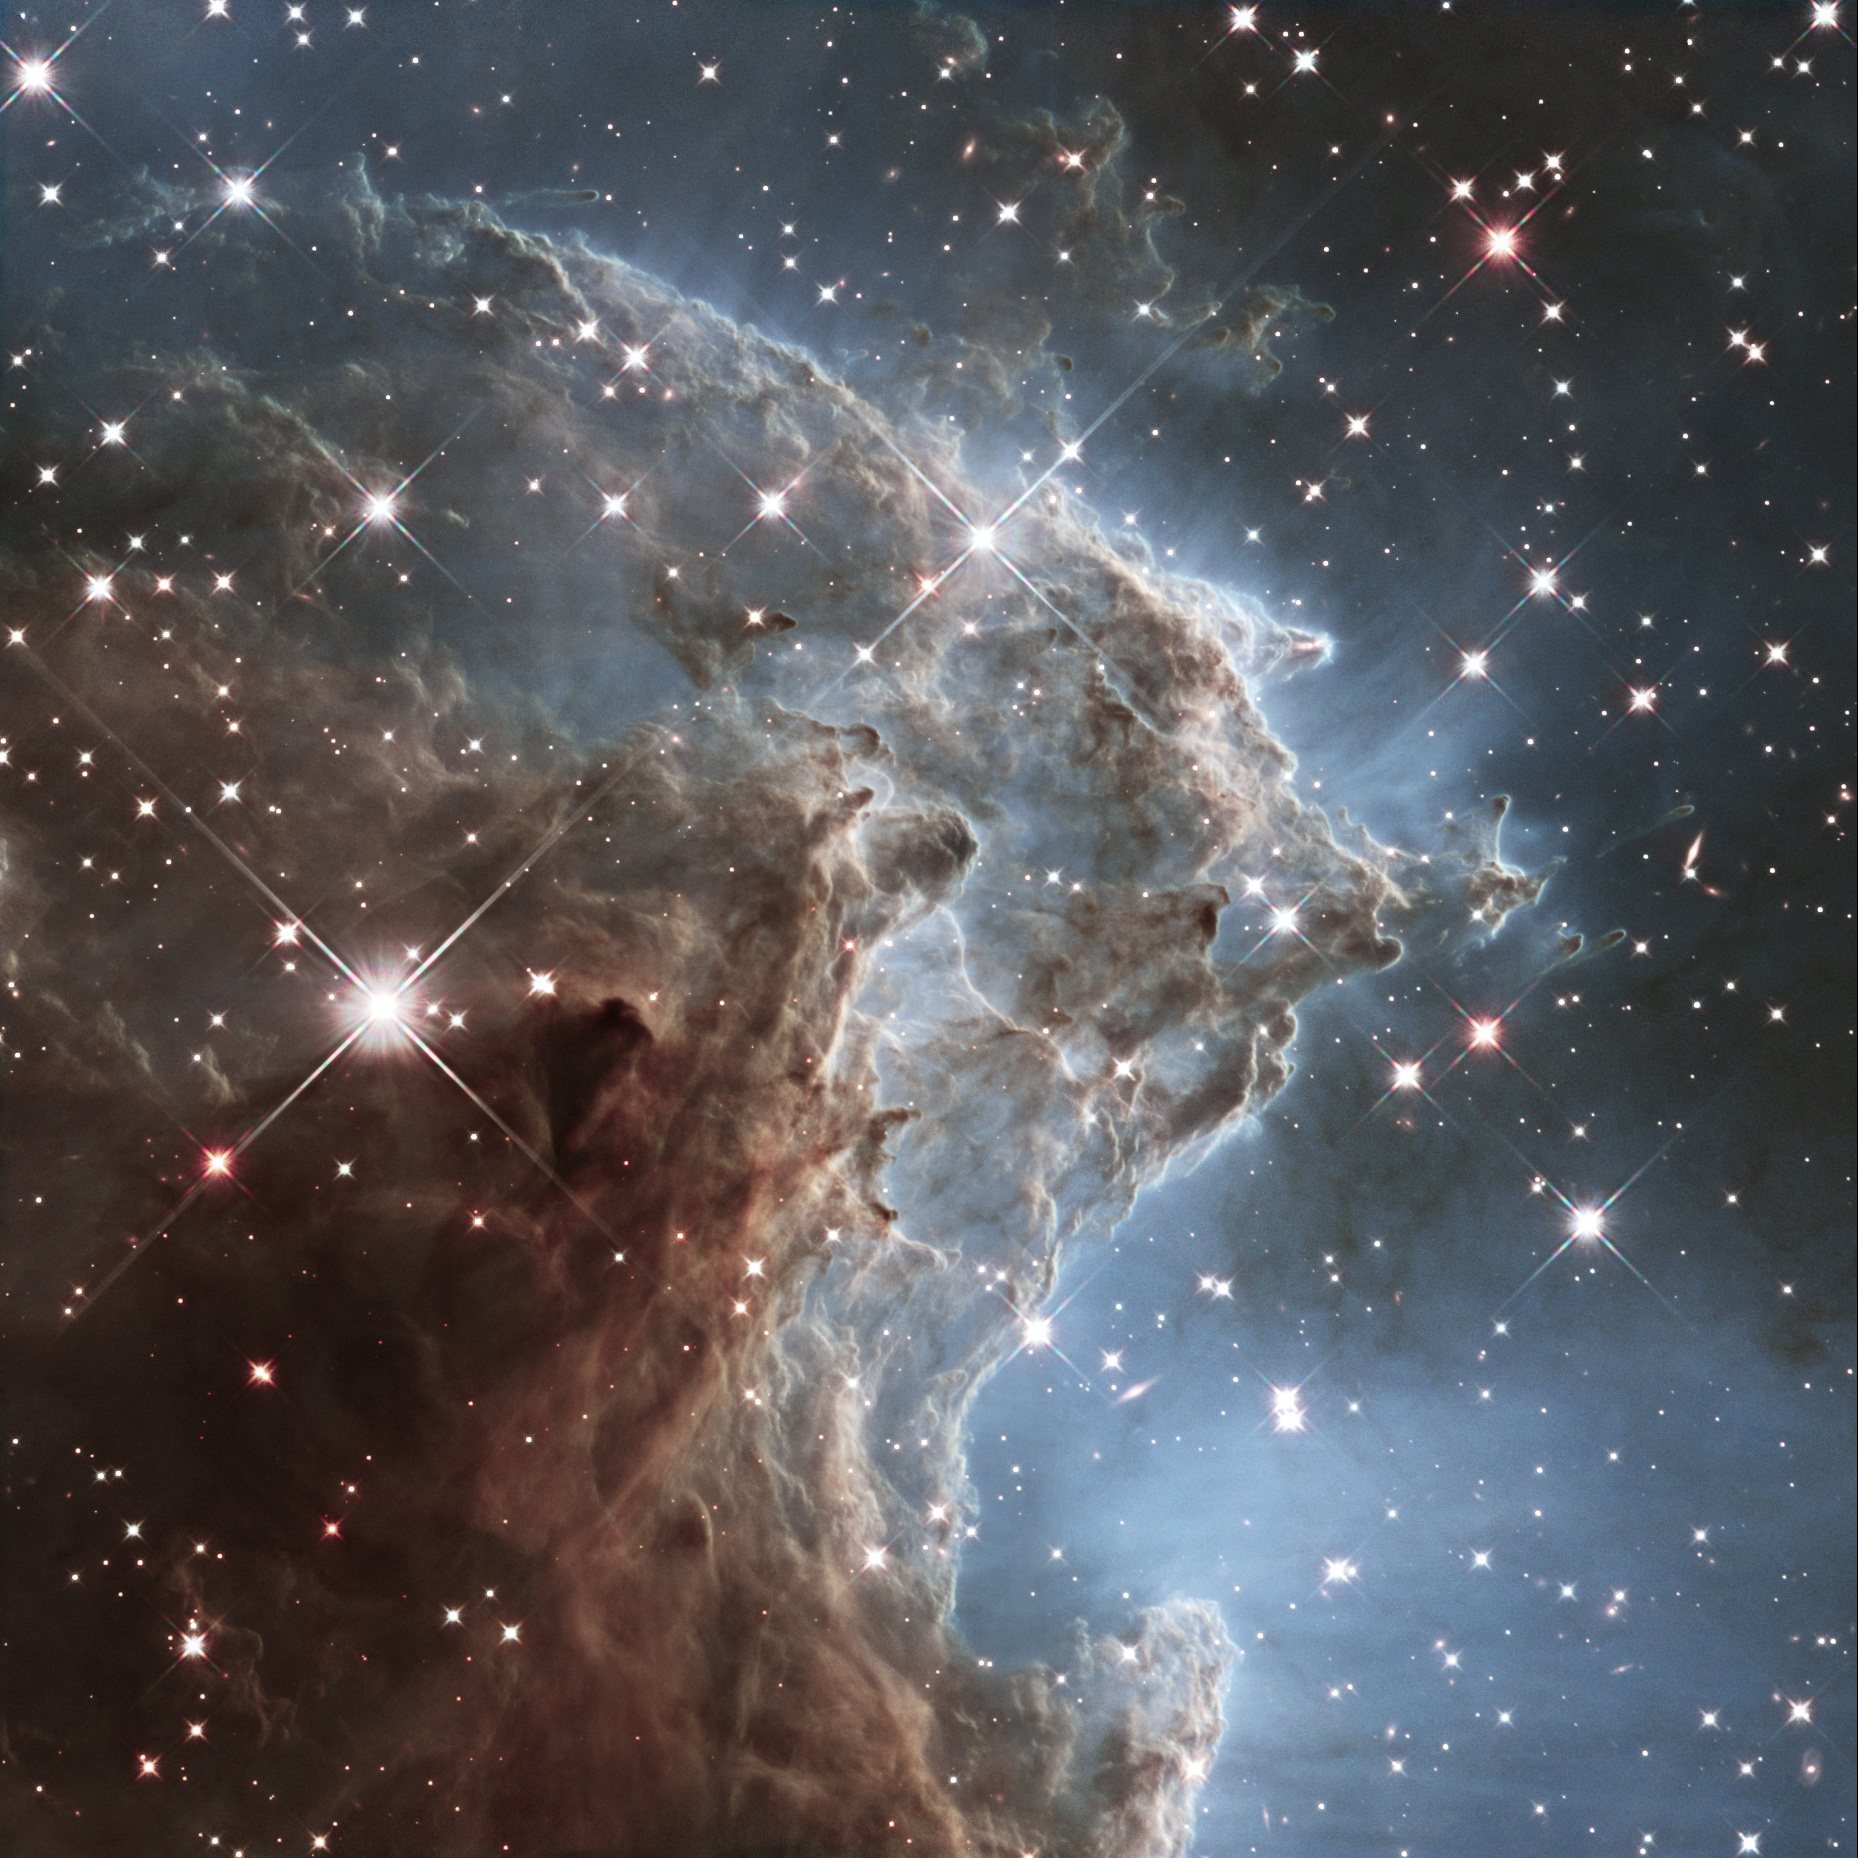 A view of the Monkey Head Nebula, released on March 17, 2014.  Otherwise known as NGC 2174, the nebula is a cloud of gas and dust that lies about 6400 light-years away in the constellation of Orion. Nebulas like this one are popular targets for Hubble, their colourful plumes of gas and fiery bright stars create ethereally beautiful pictures. (NASA/ESA/Hubble Heritage Team)